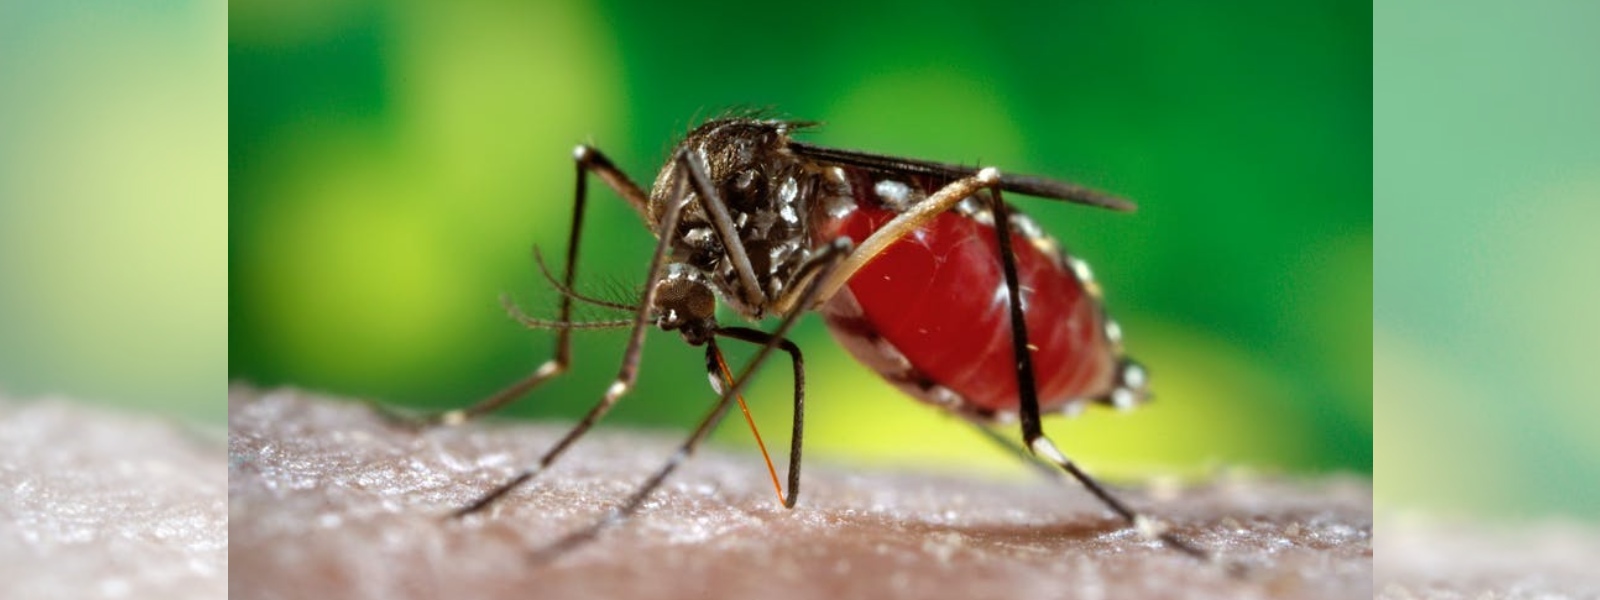 75% of construction sites in Sri Lanka are breeding grounds for Dengue: Health Ministry